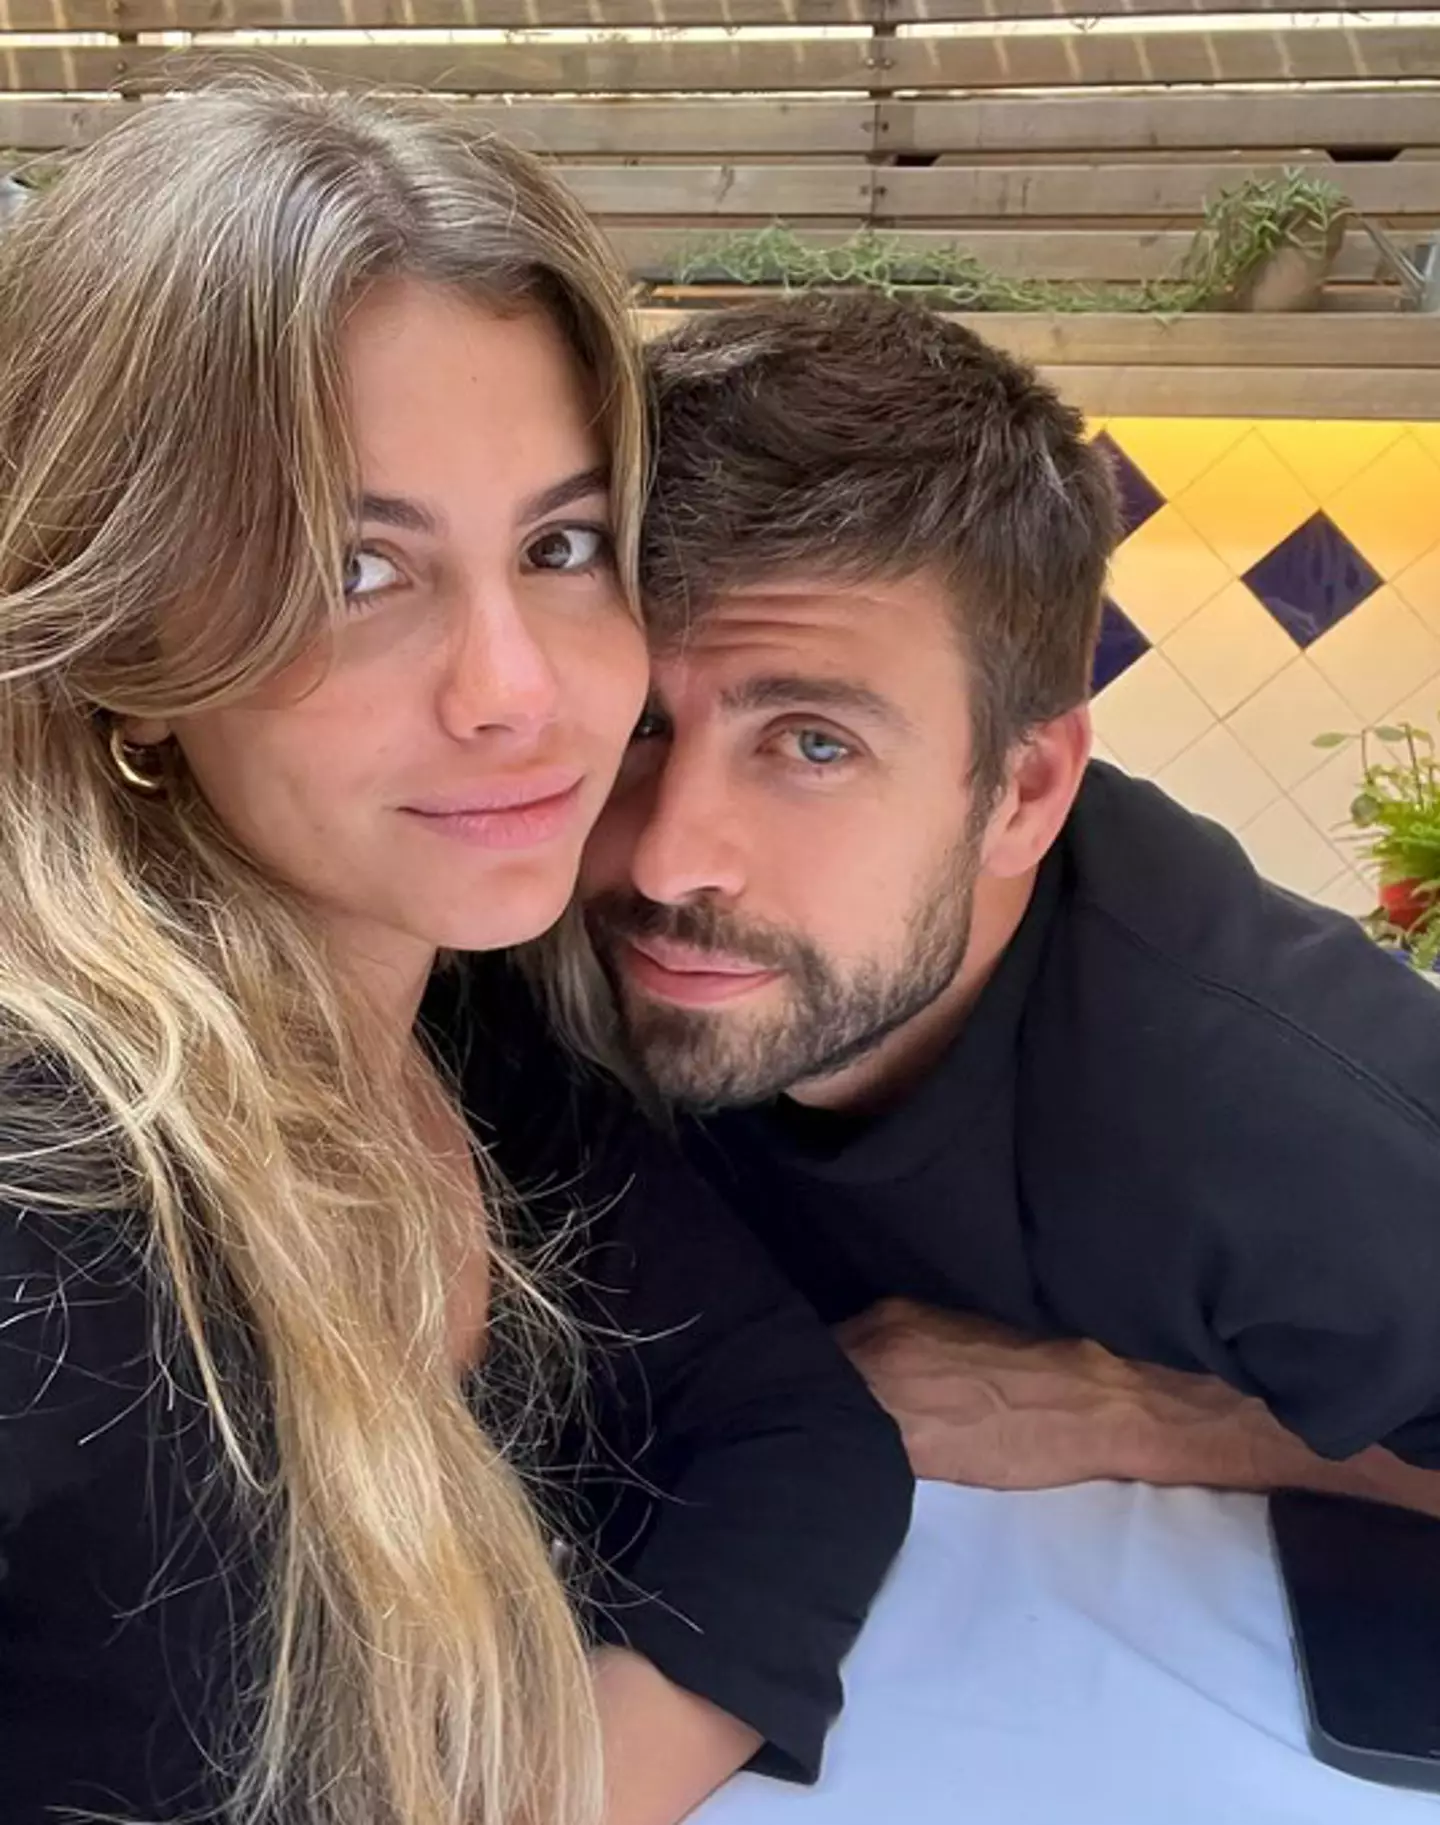 Piqué posted a photo with Clara Chia Marti on his Instagram.